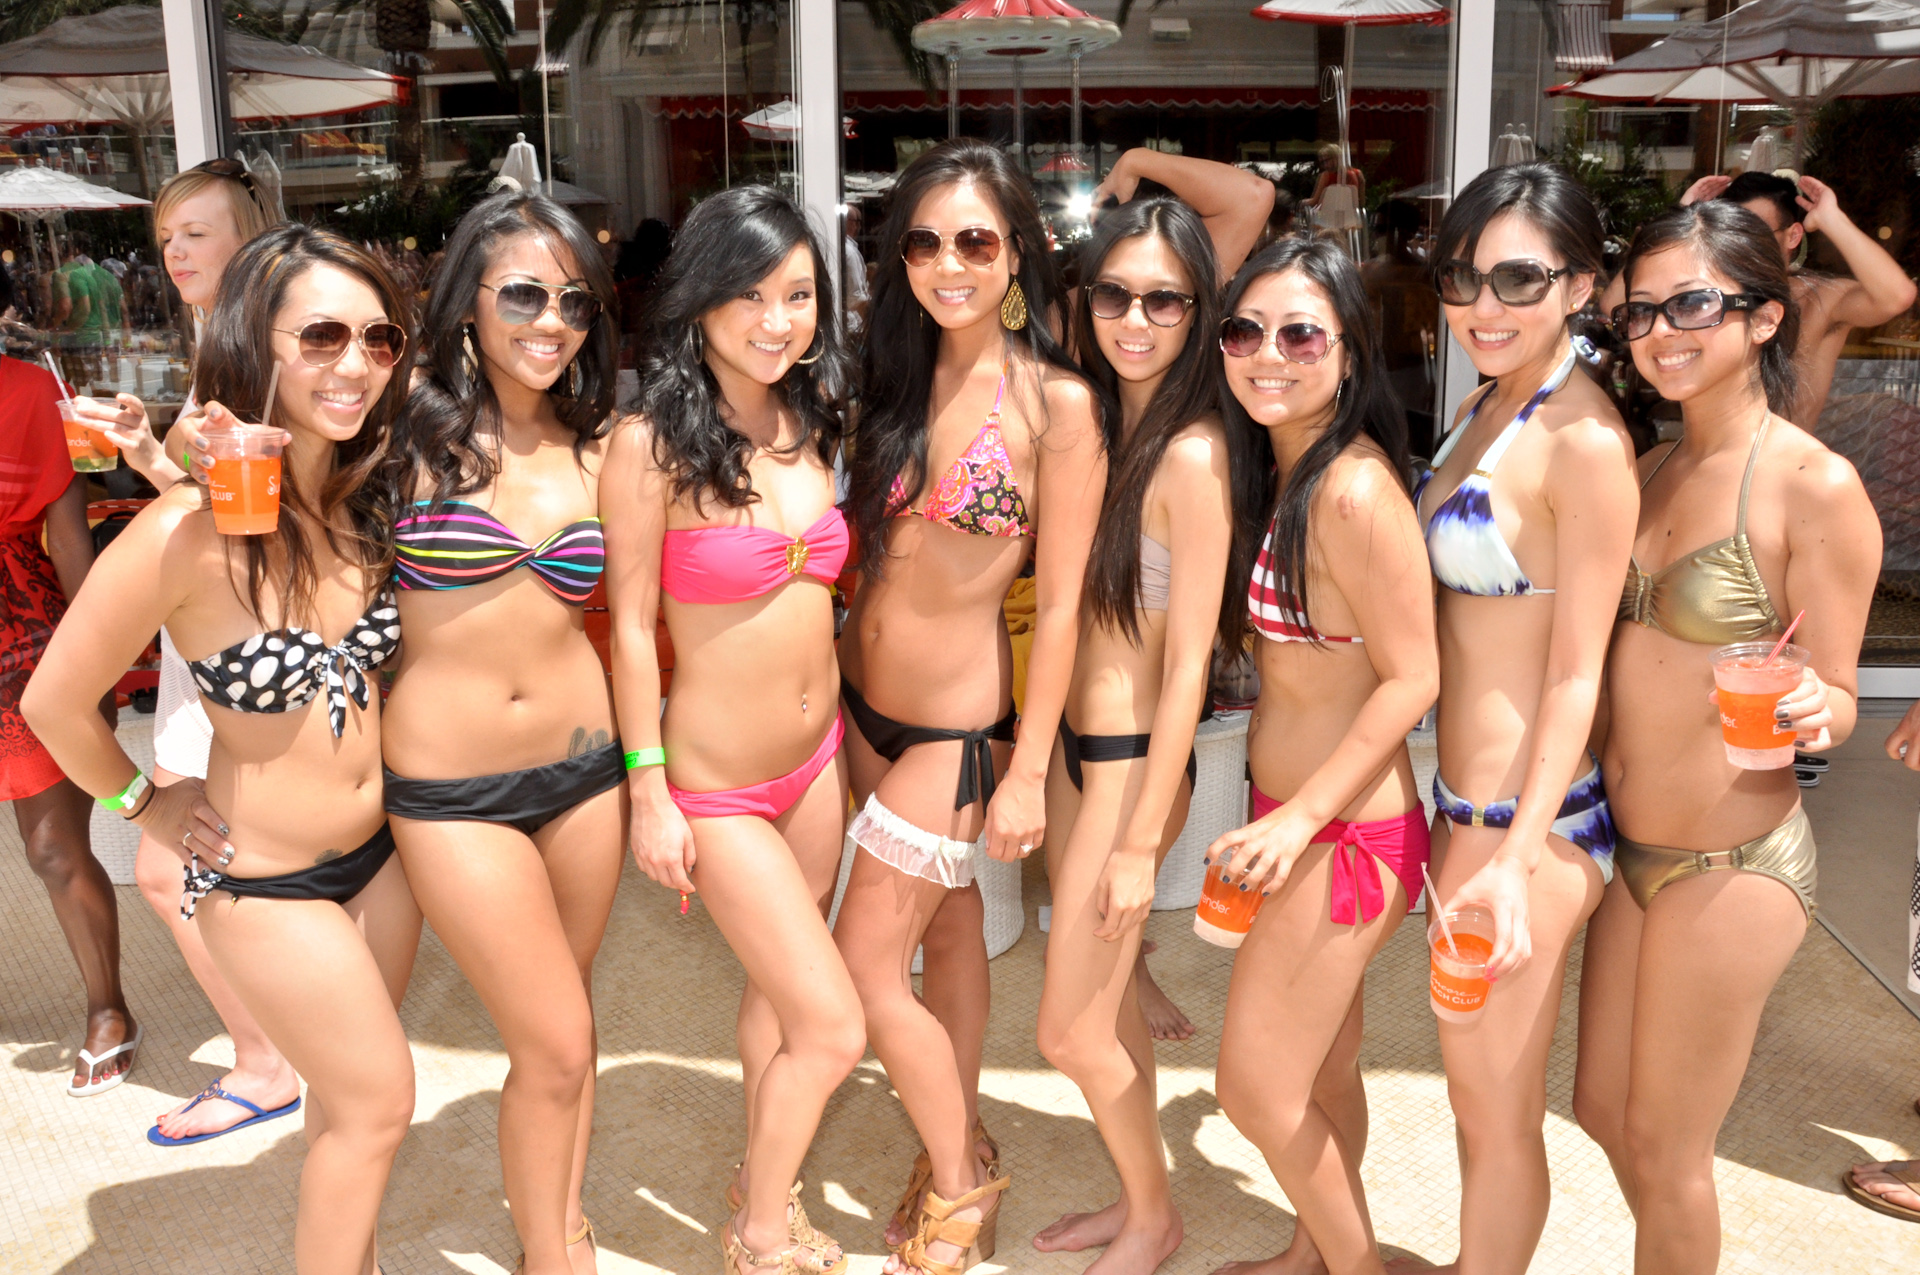 When do the pool parties close in Vegas?